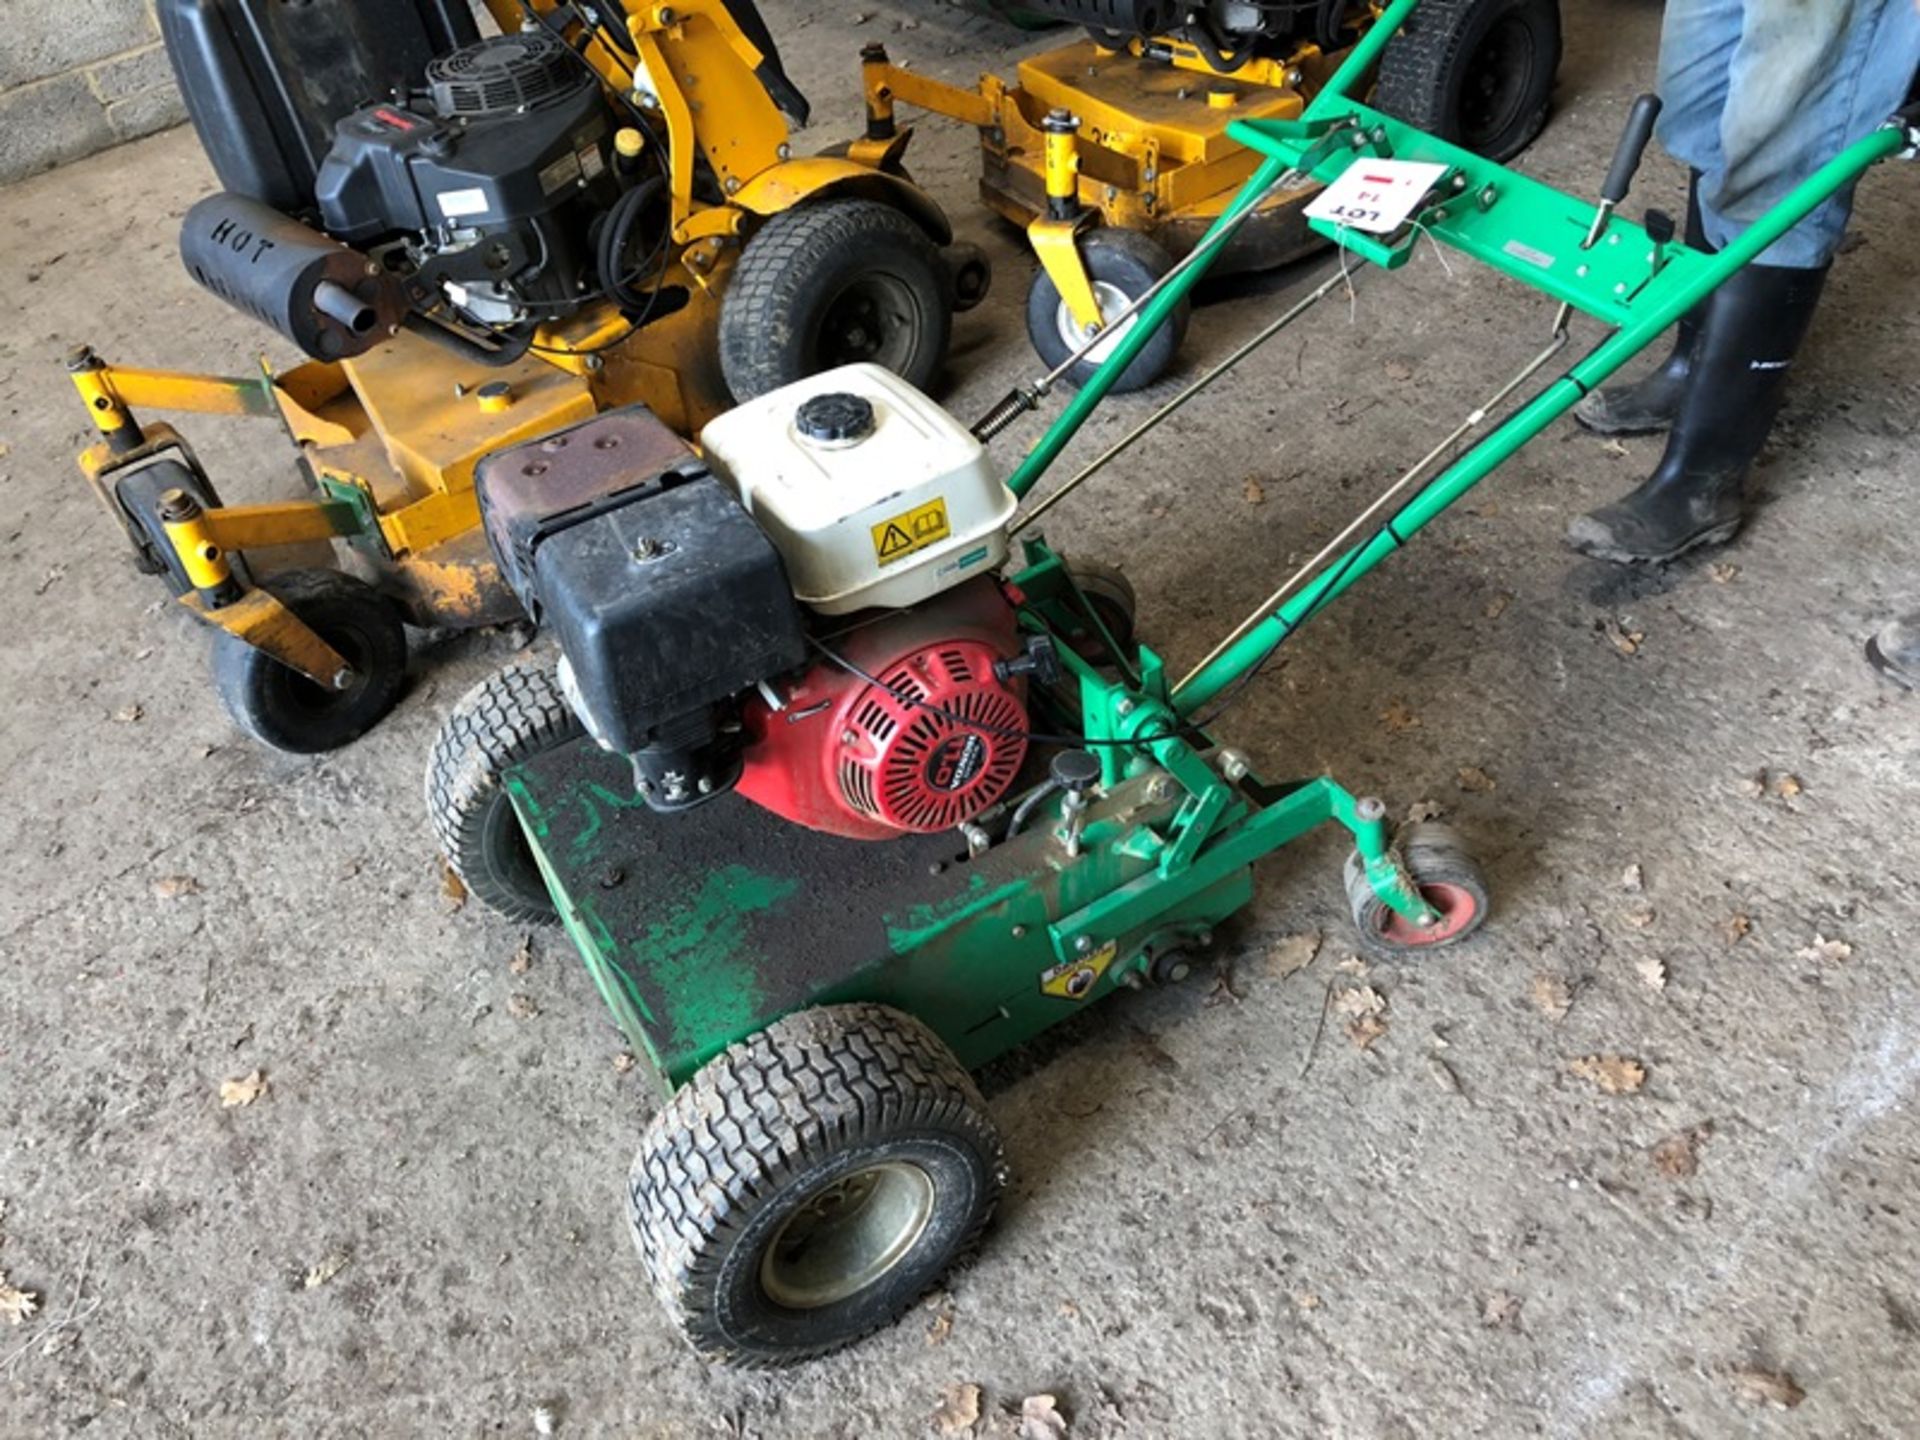 Graden Scarifier lawn aerator with Honda GX340 11.00 hp petrol engine (broken arms for spares or - Image 3 of 5